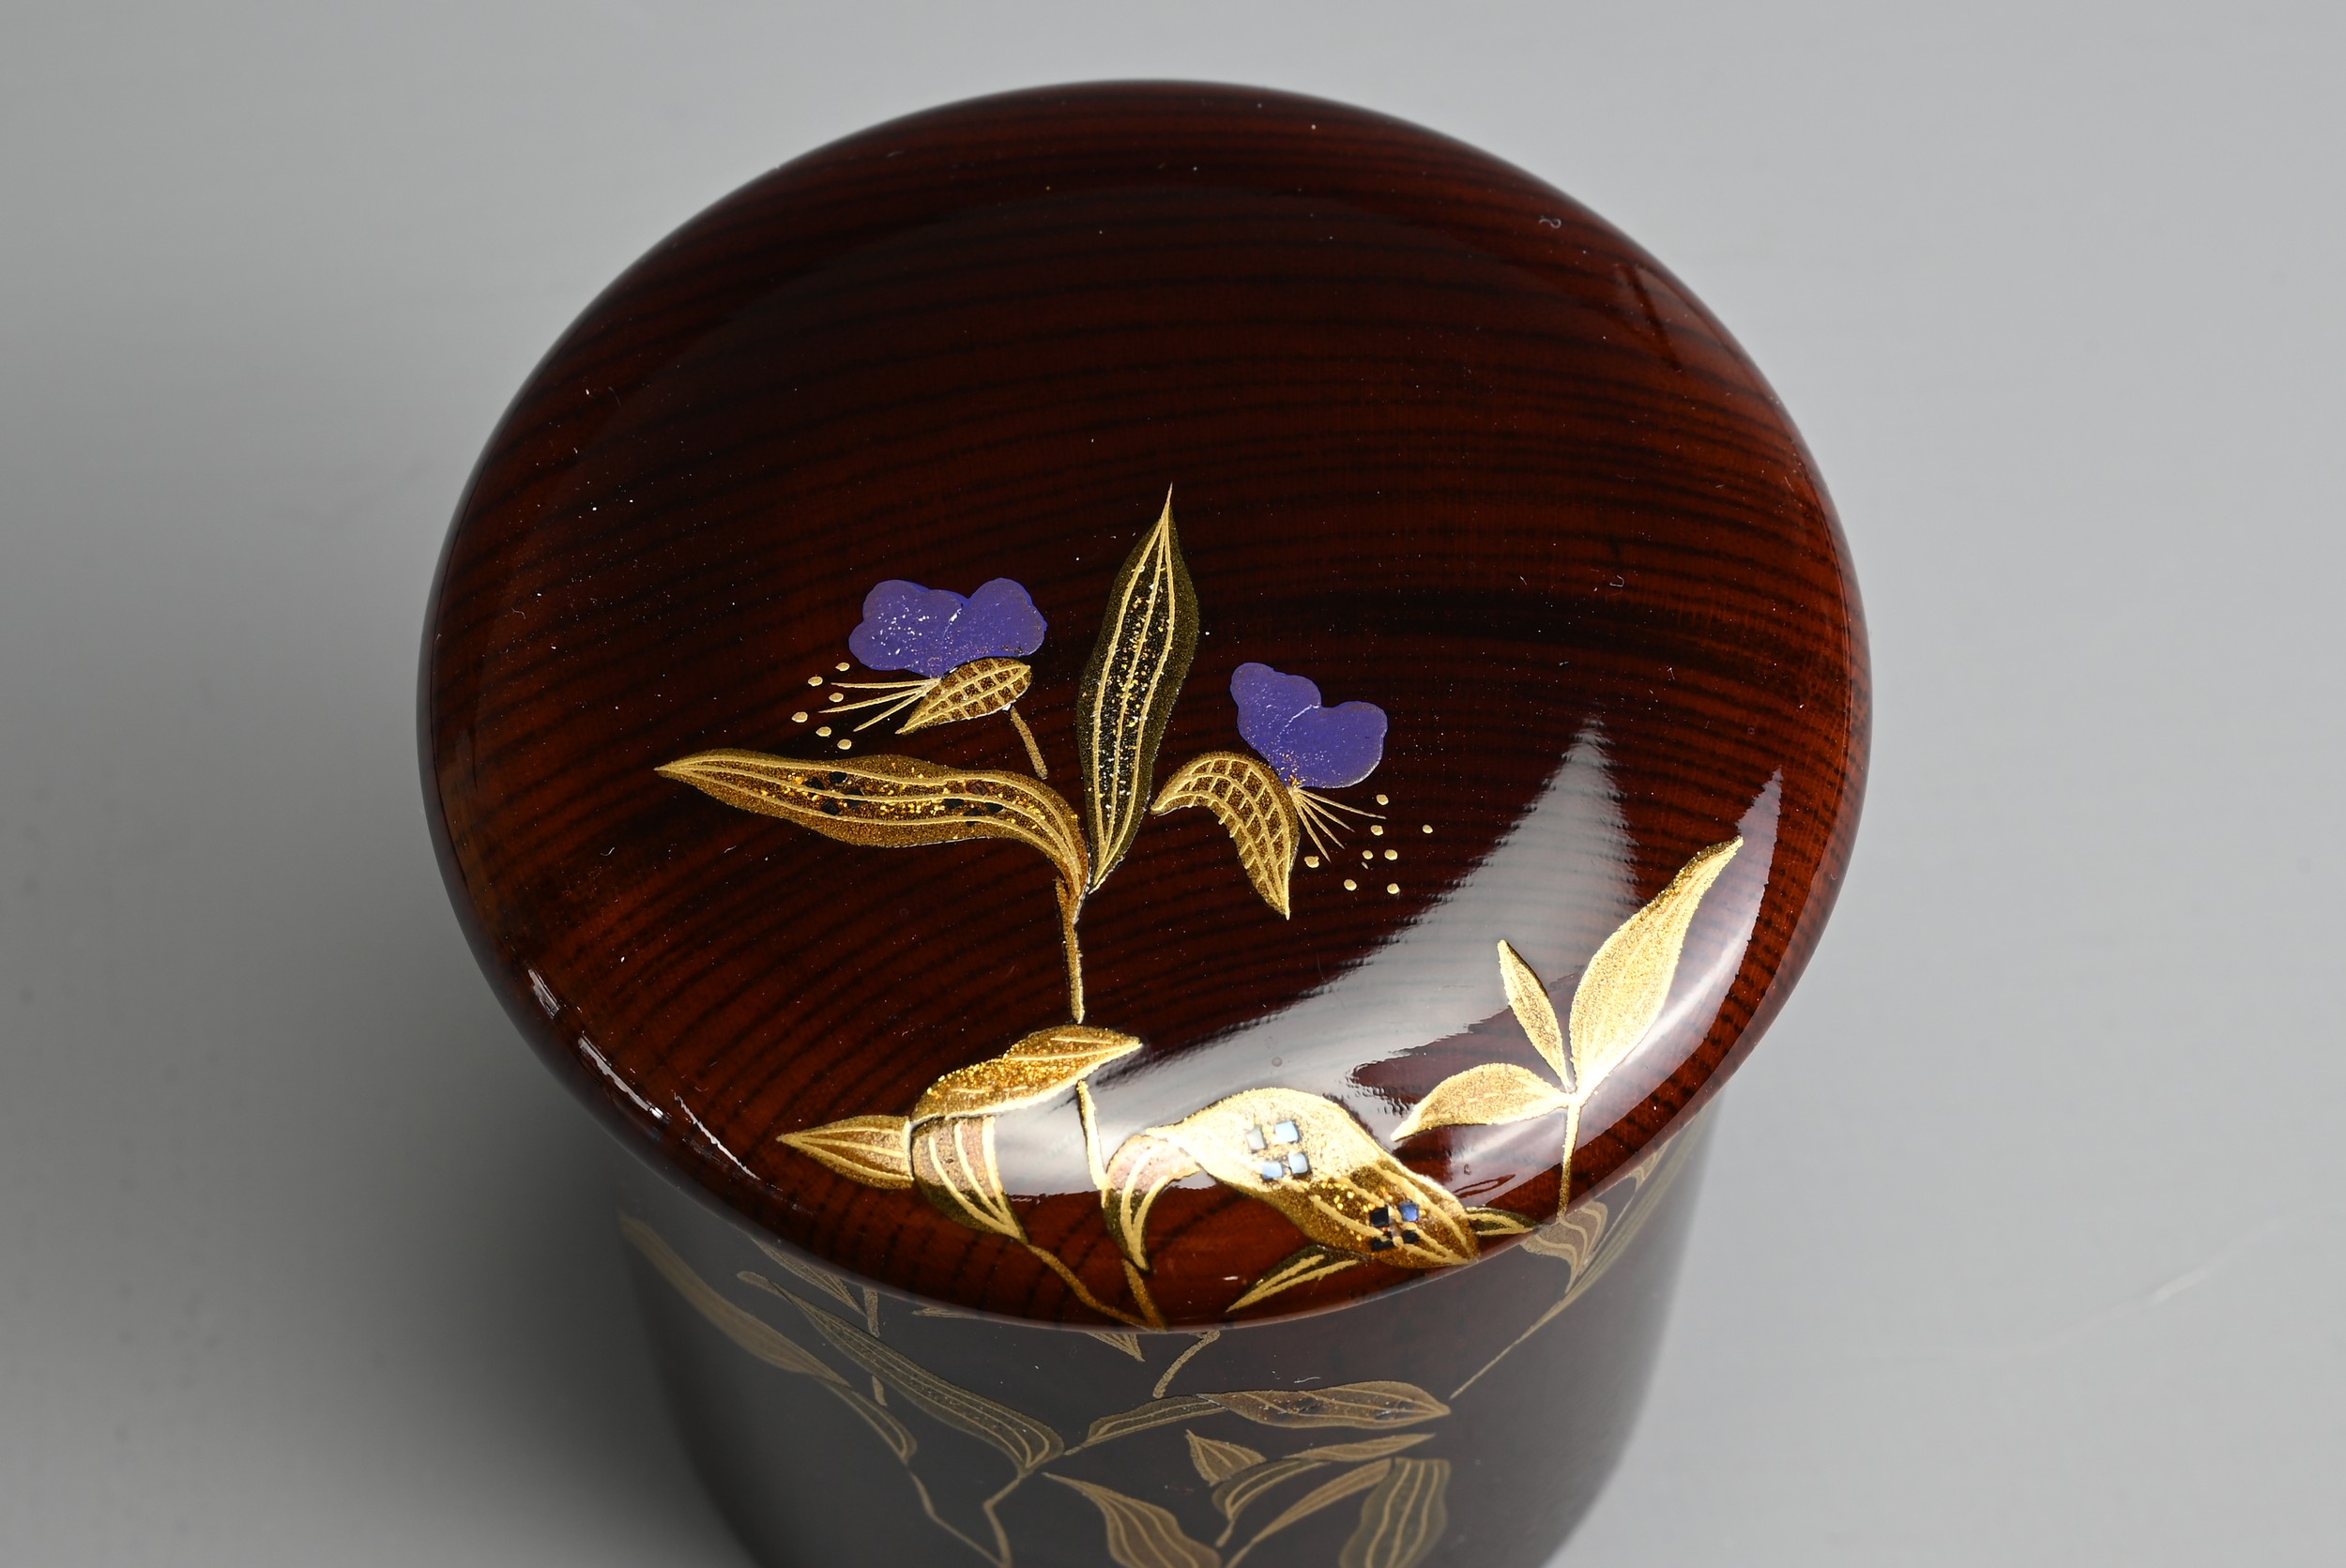 A CONTEMPORARY JAPANESE LACQUER CYLINDRICAL TEA CADDY AND COVER. Decorated in kinrinji-style maki- - Image 5 of 5